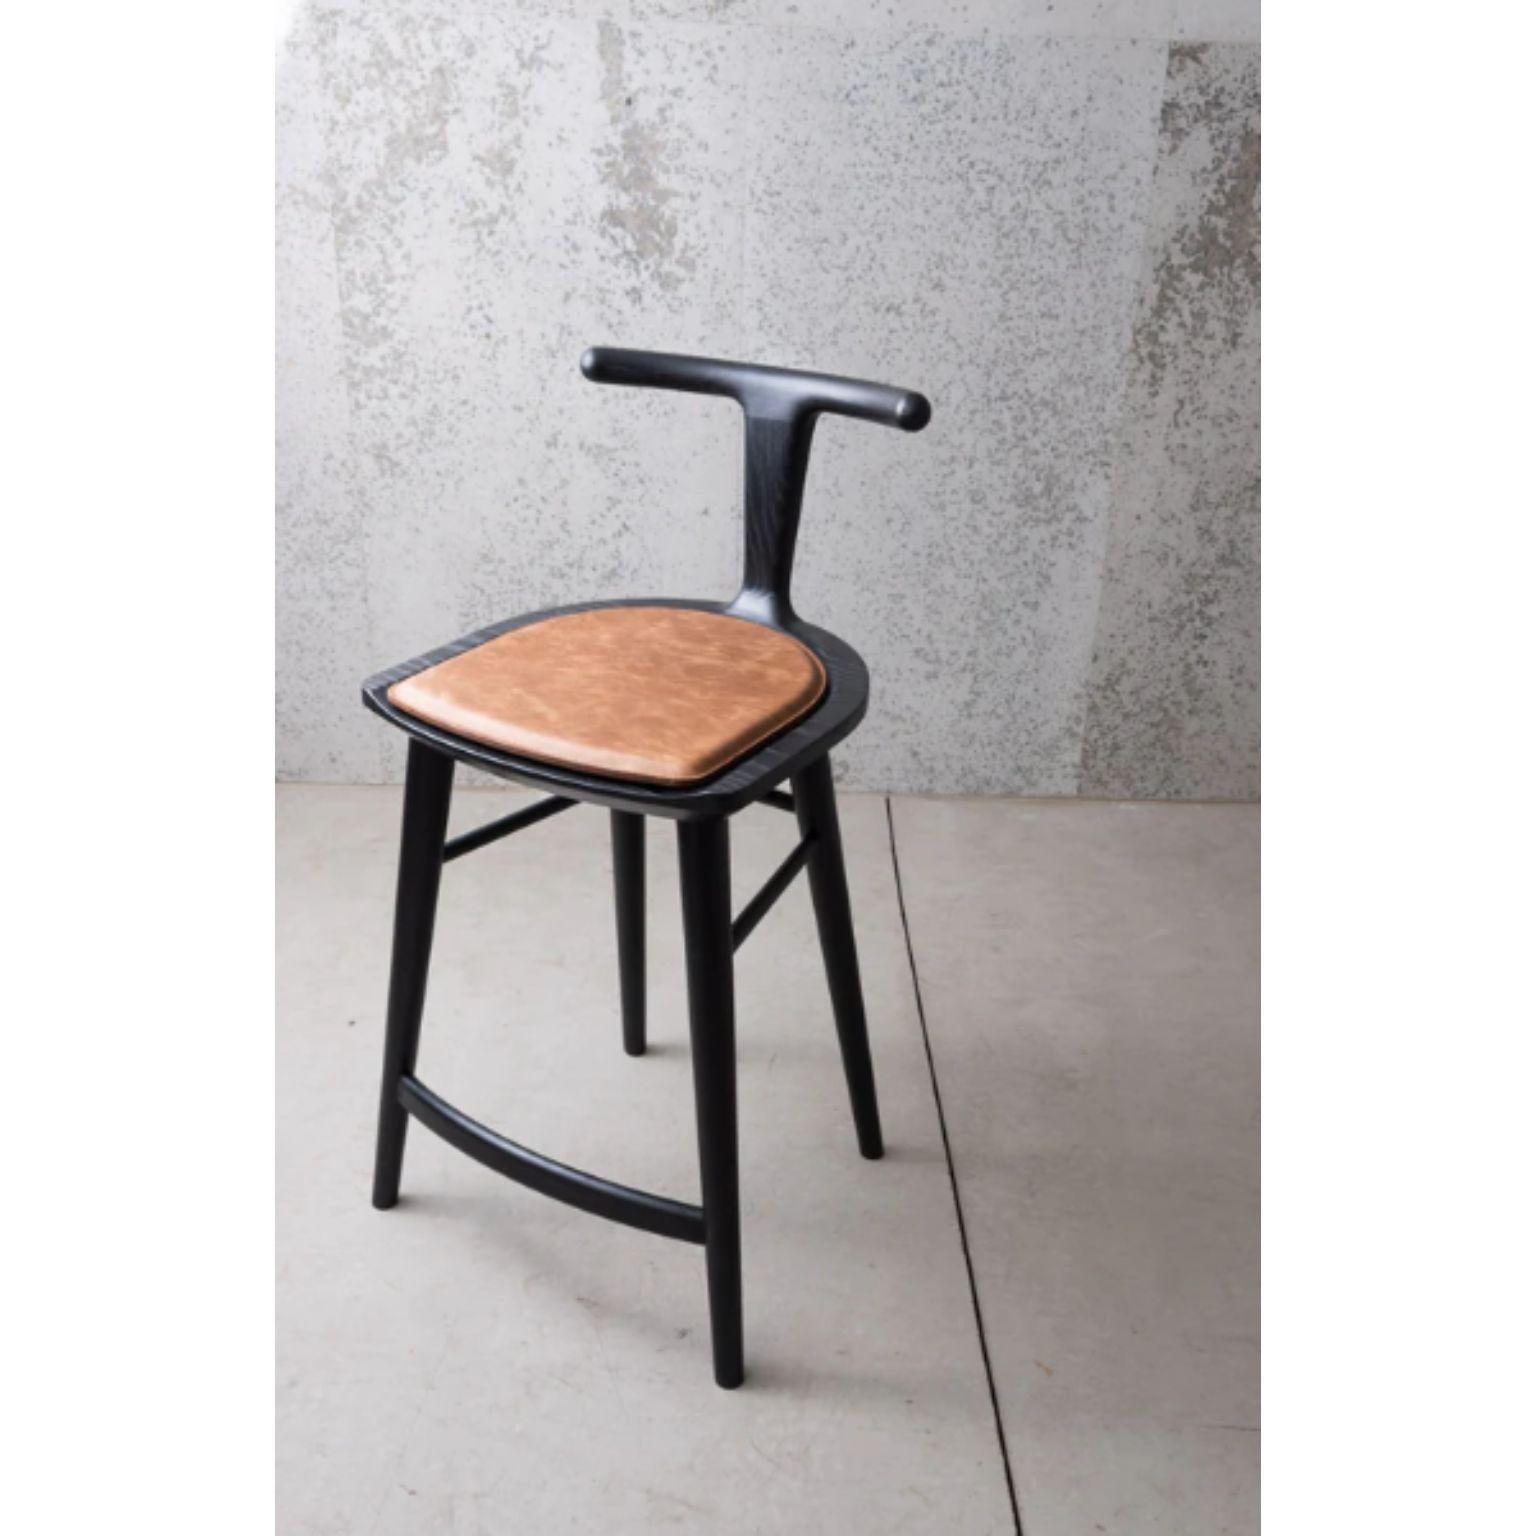 Charcoal Ash Oxbend stool with leather seat pad by Fernweh Woodworking
Dimensions: 
Seat: W 17